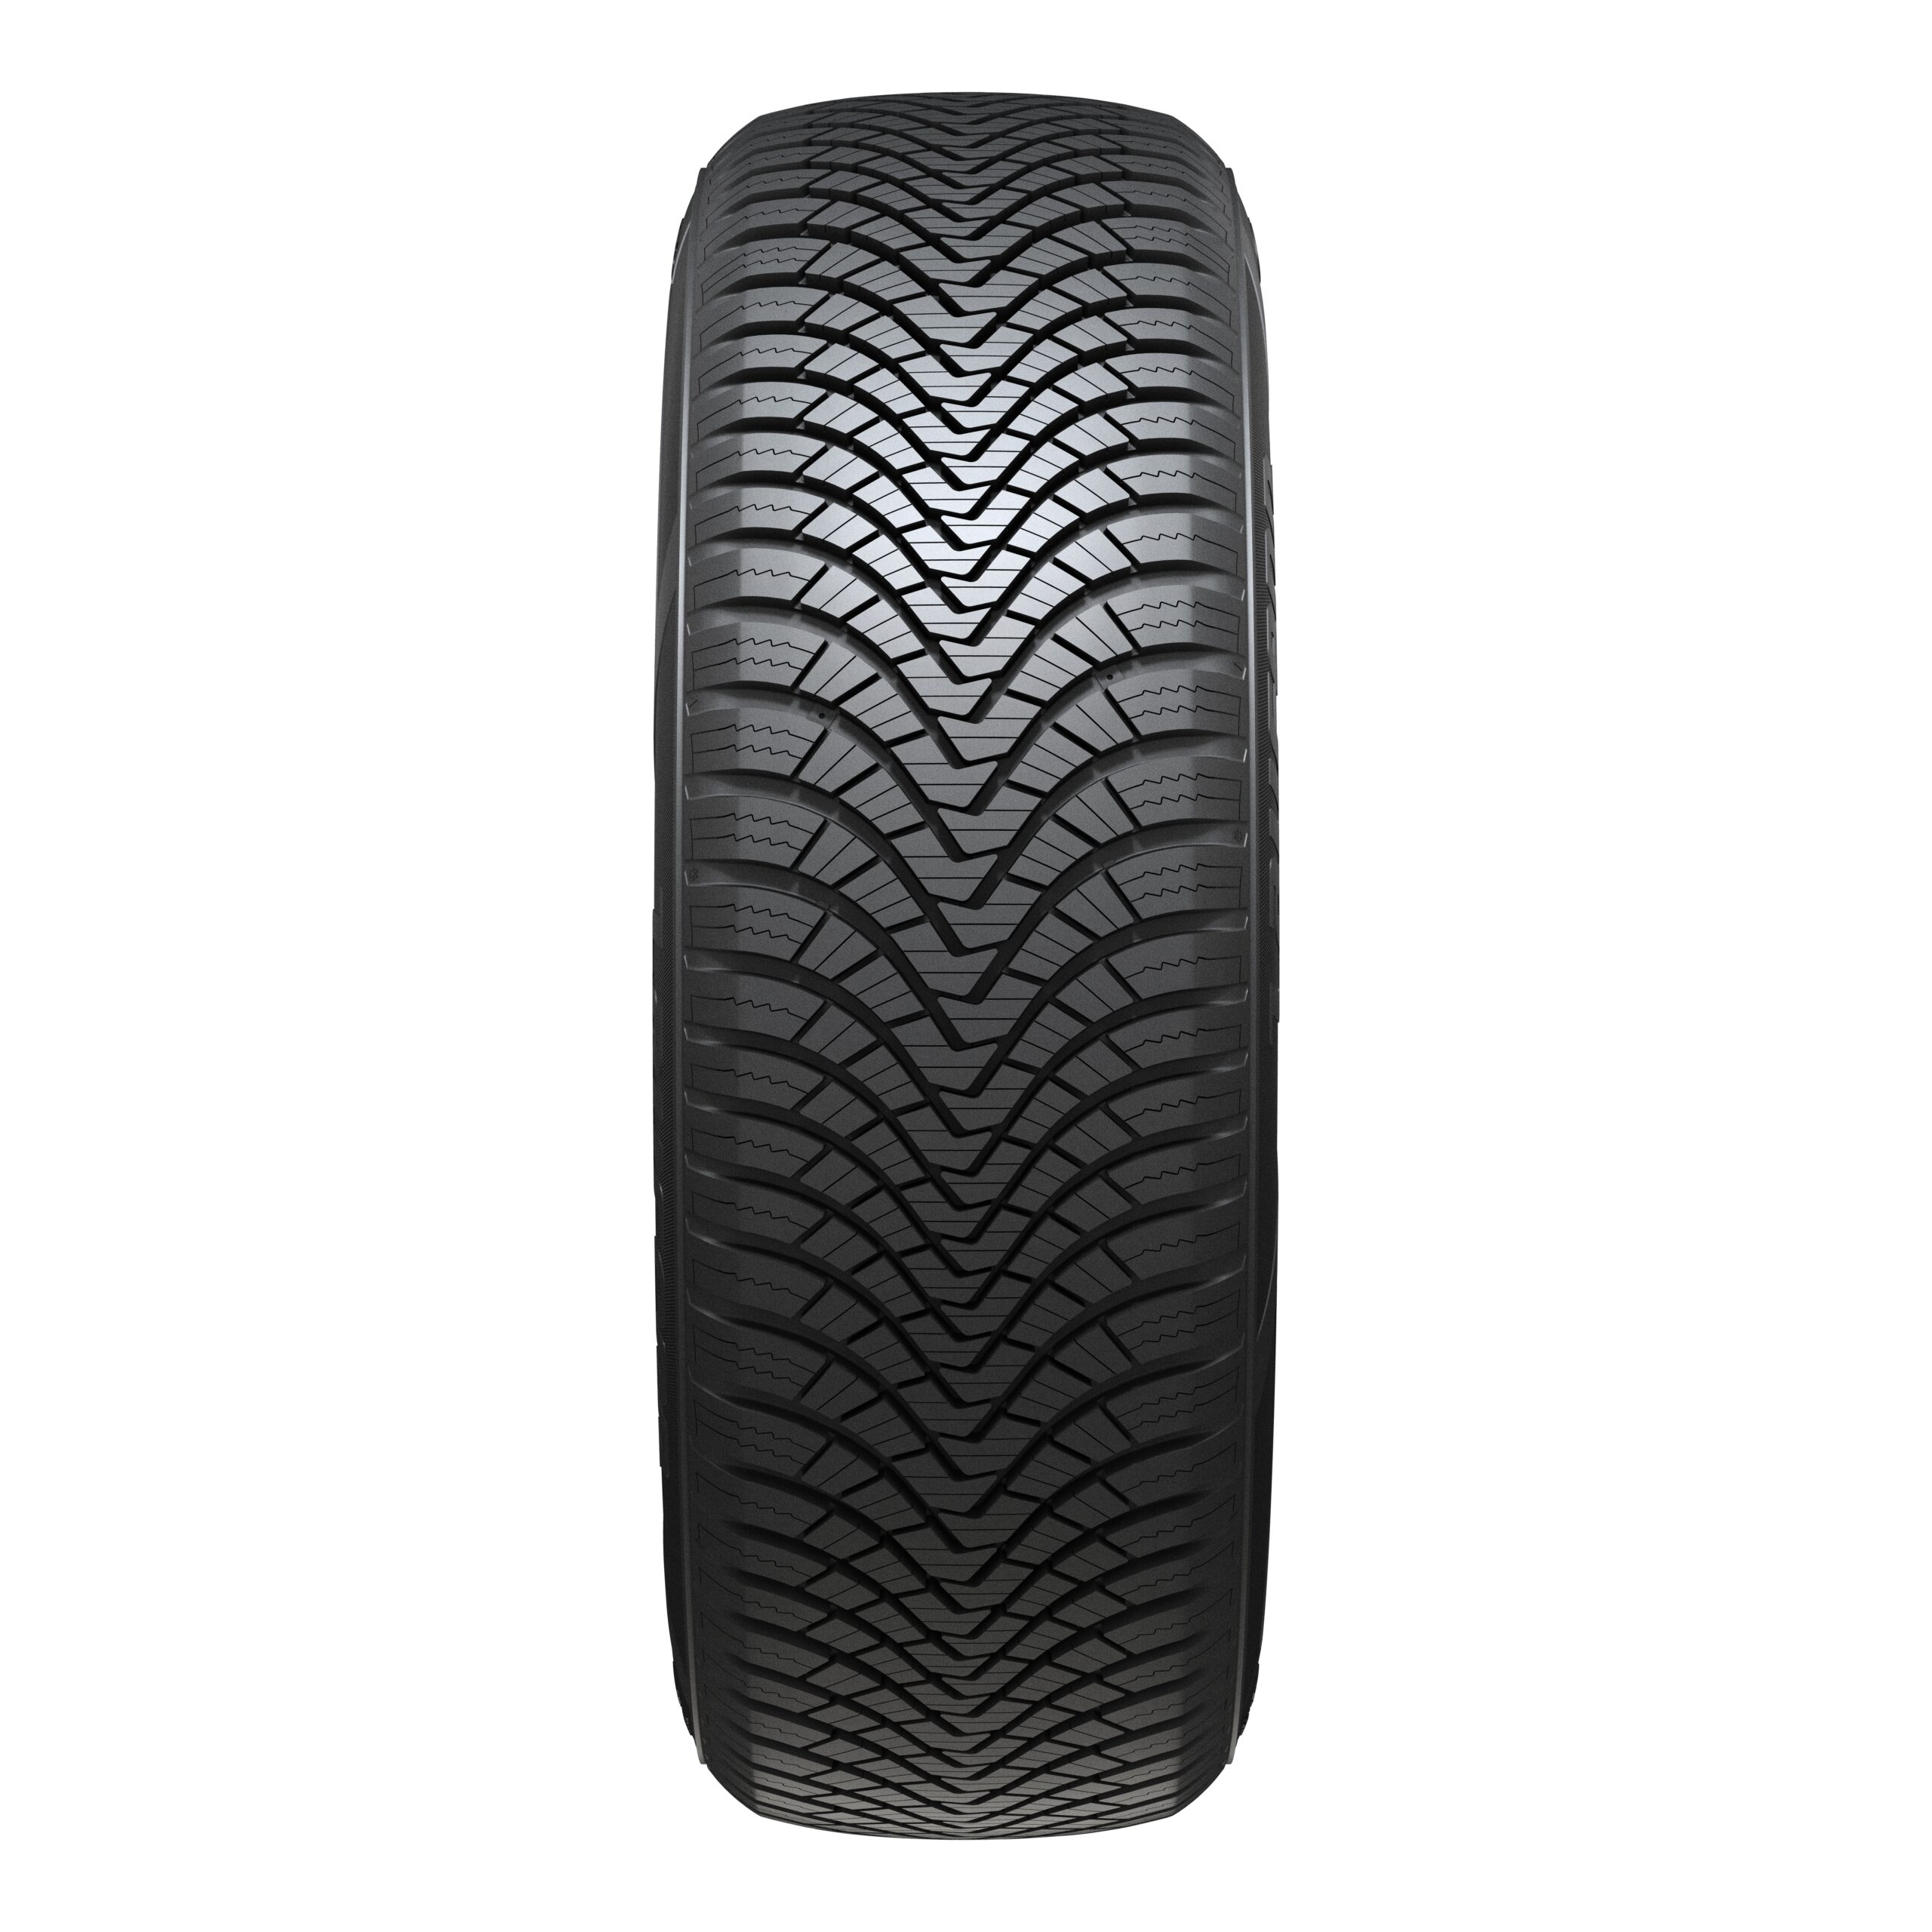 Laufenn G Fit 4s Lh71 | What Tyre | Independent tyre comparison